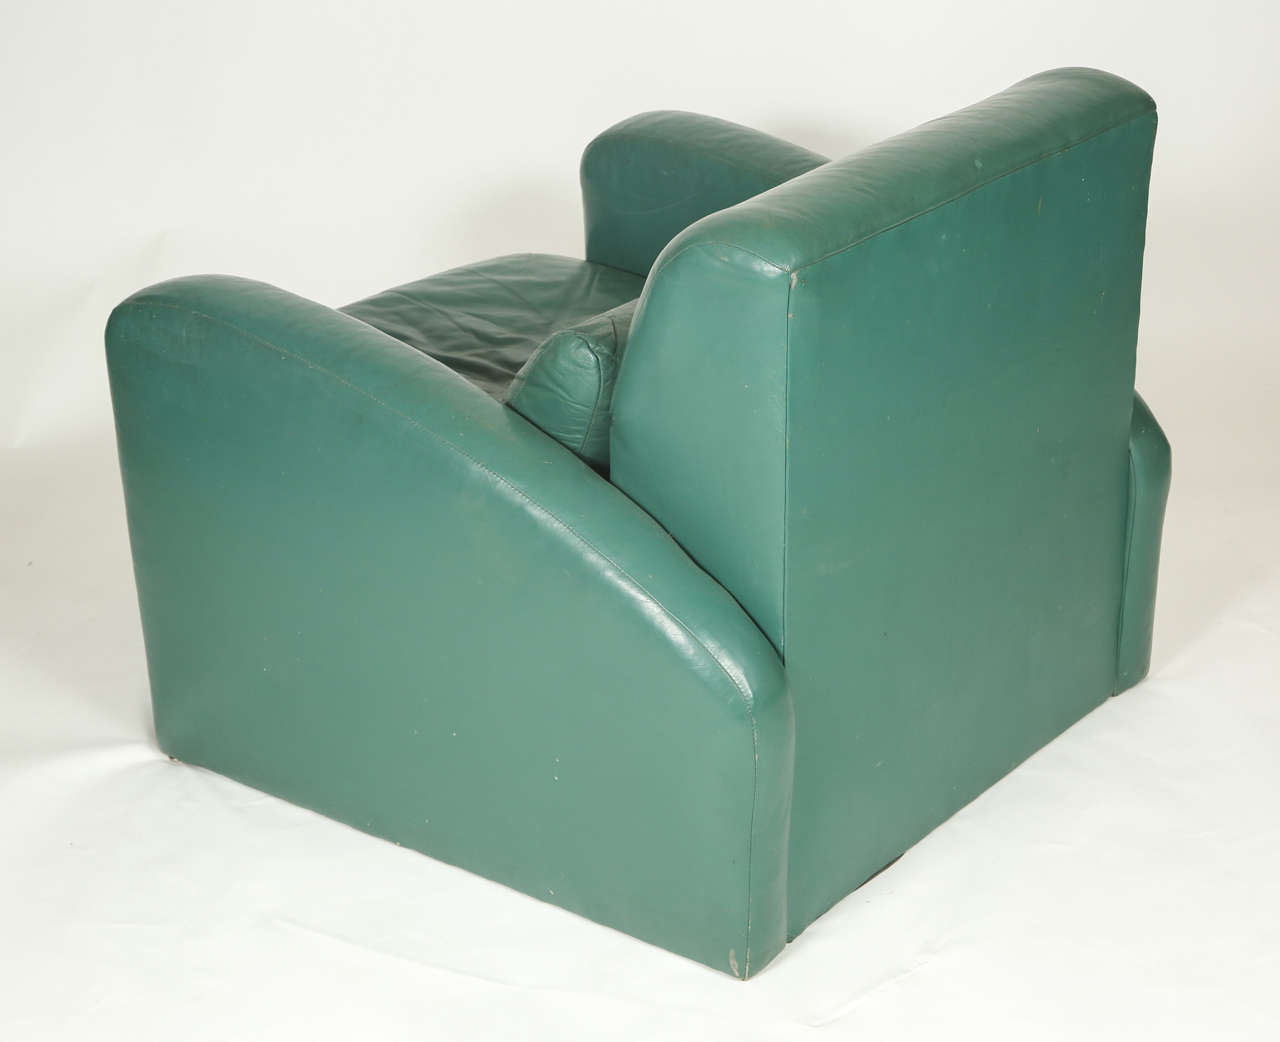 Pair of Club chairs by Jay Spectre 1